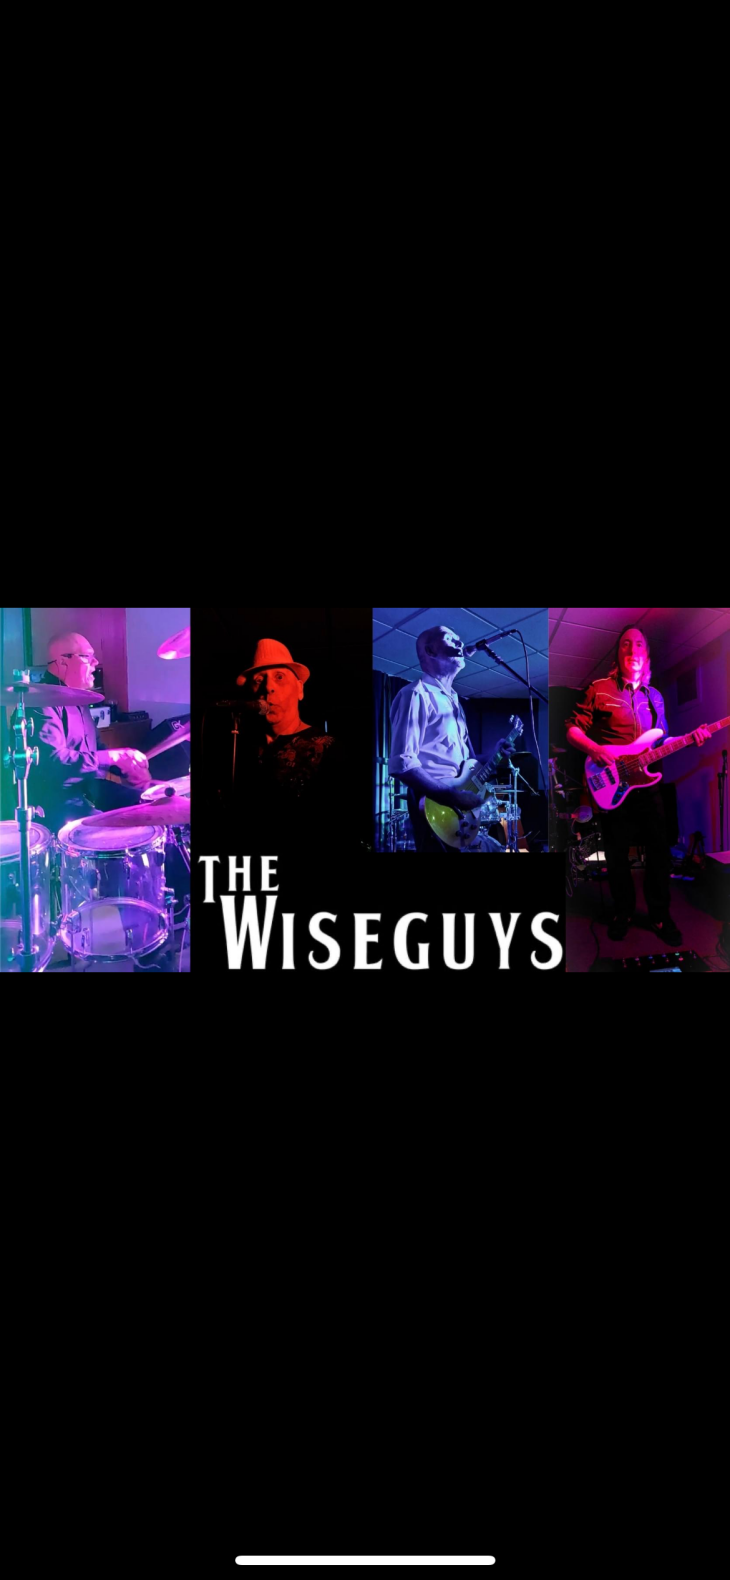 LIVE MUSIC FROM THE WISEGUYS